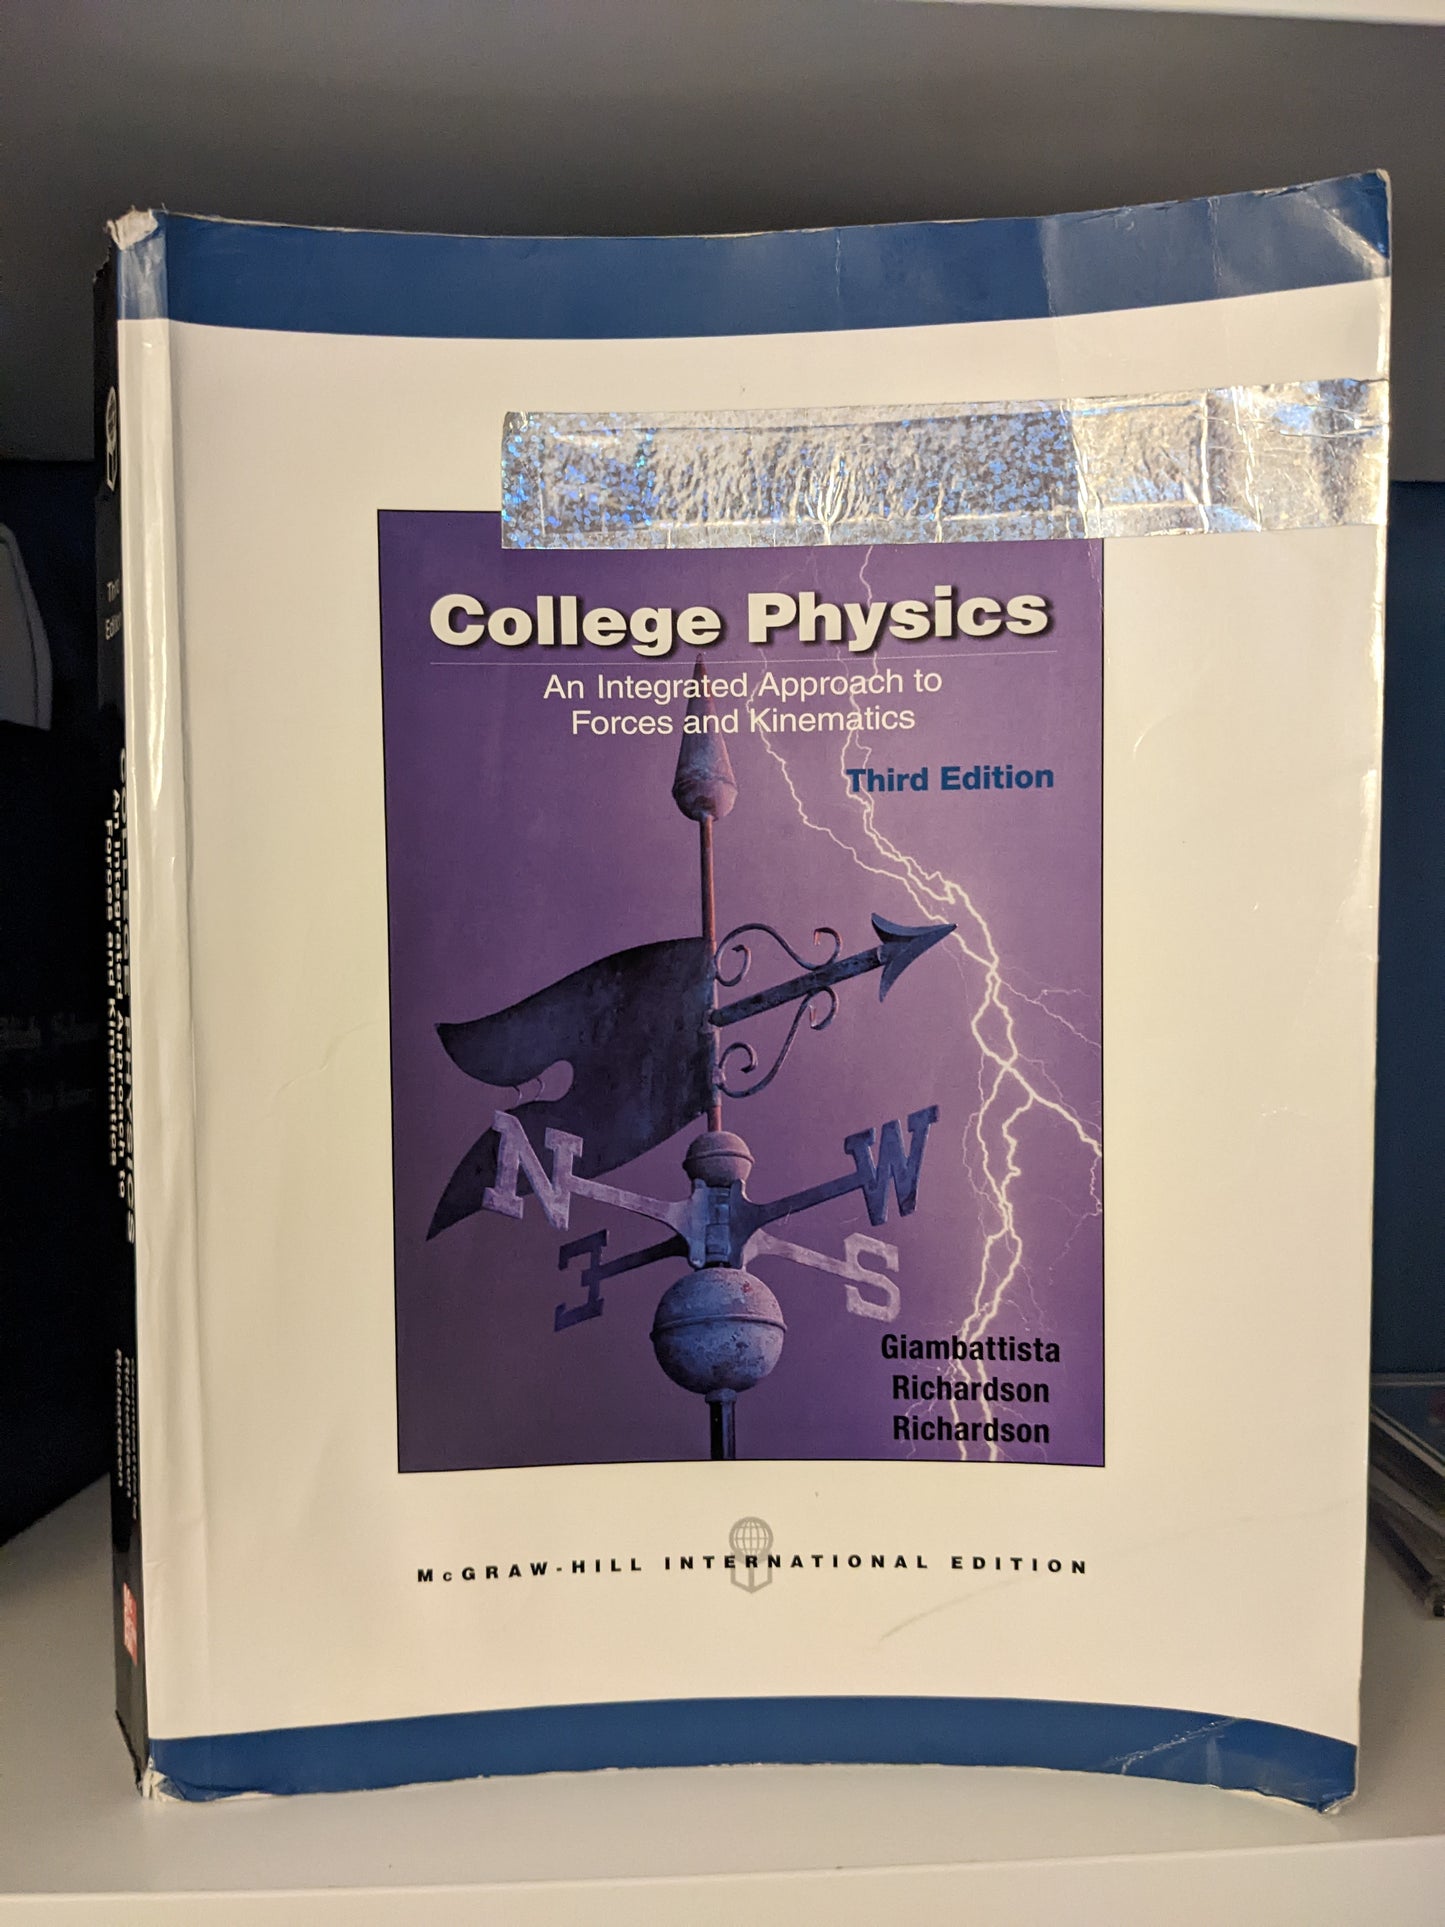 College Physics Paperback – January 1, 2008